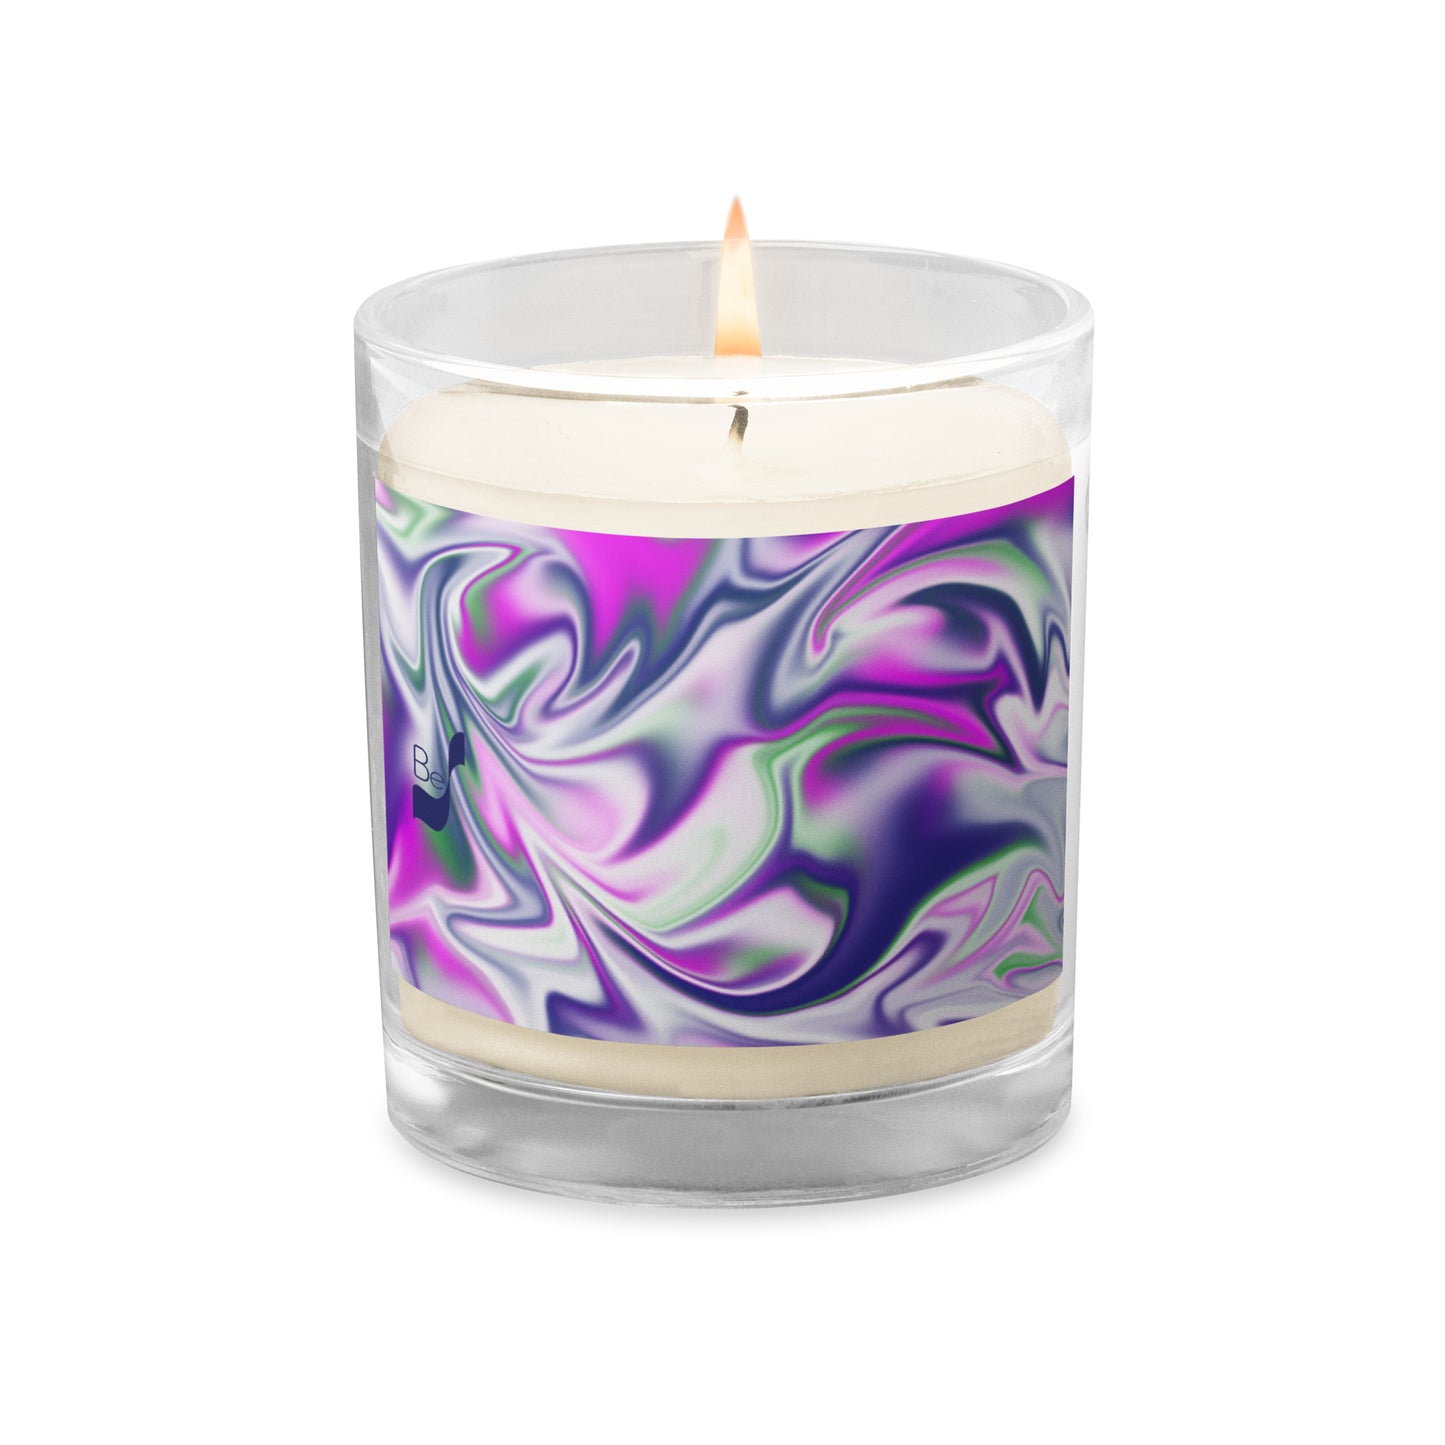 Burst BeSculpt Abstract Art Glass Jar Soy Wax Candle Reversed Image